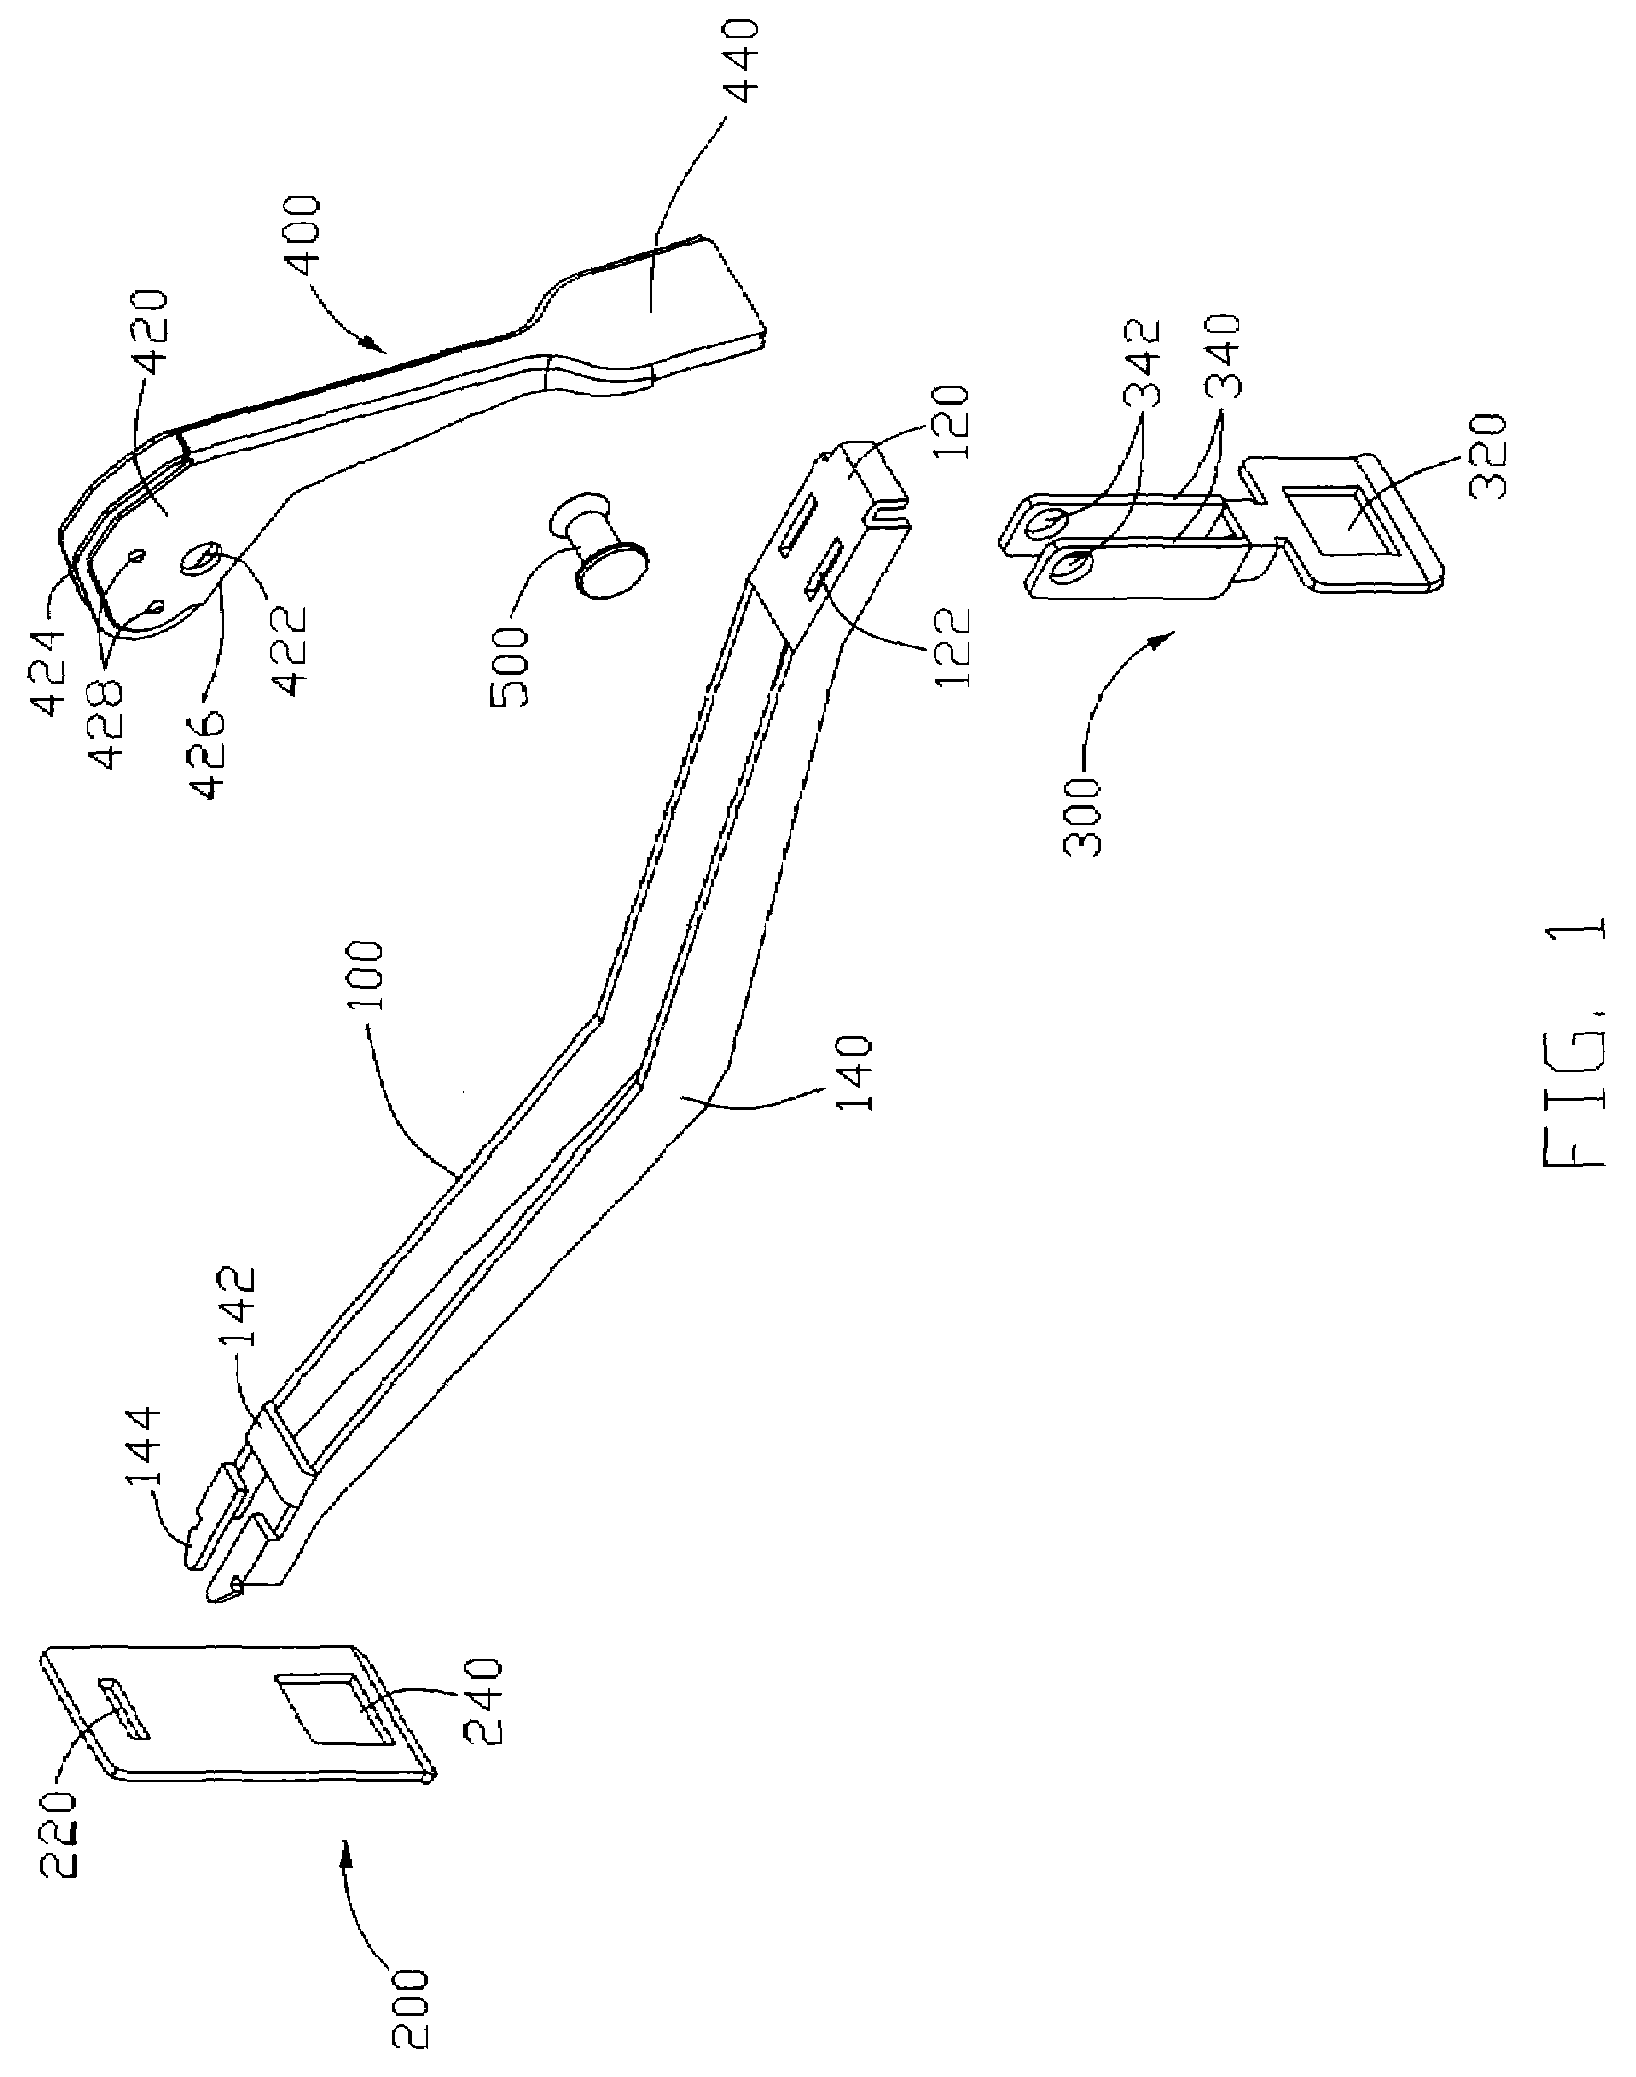 Clip for heat dissipation device